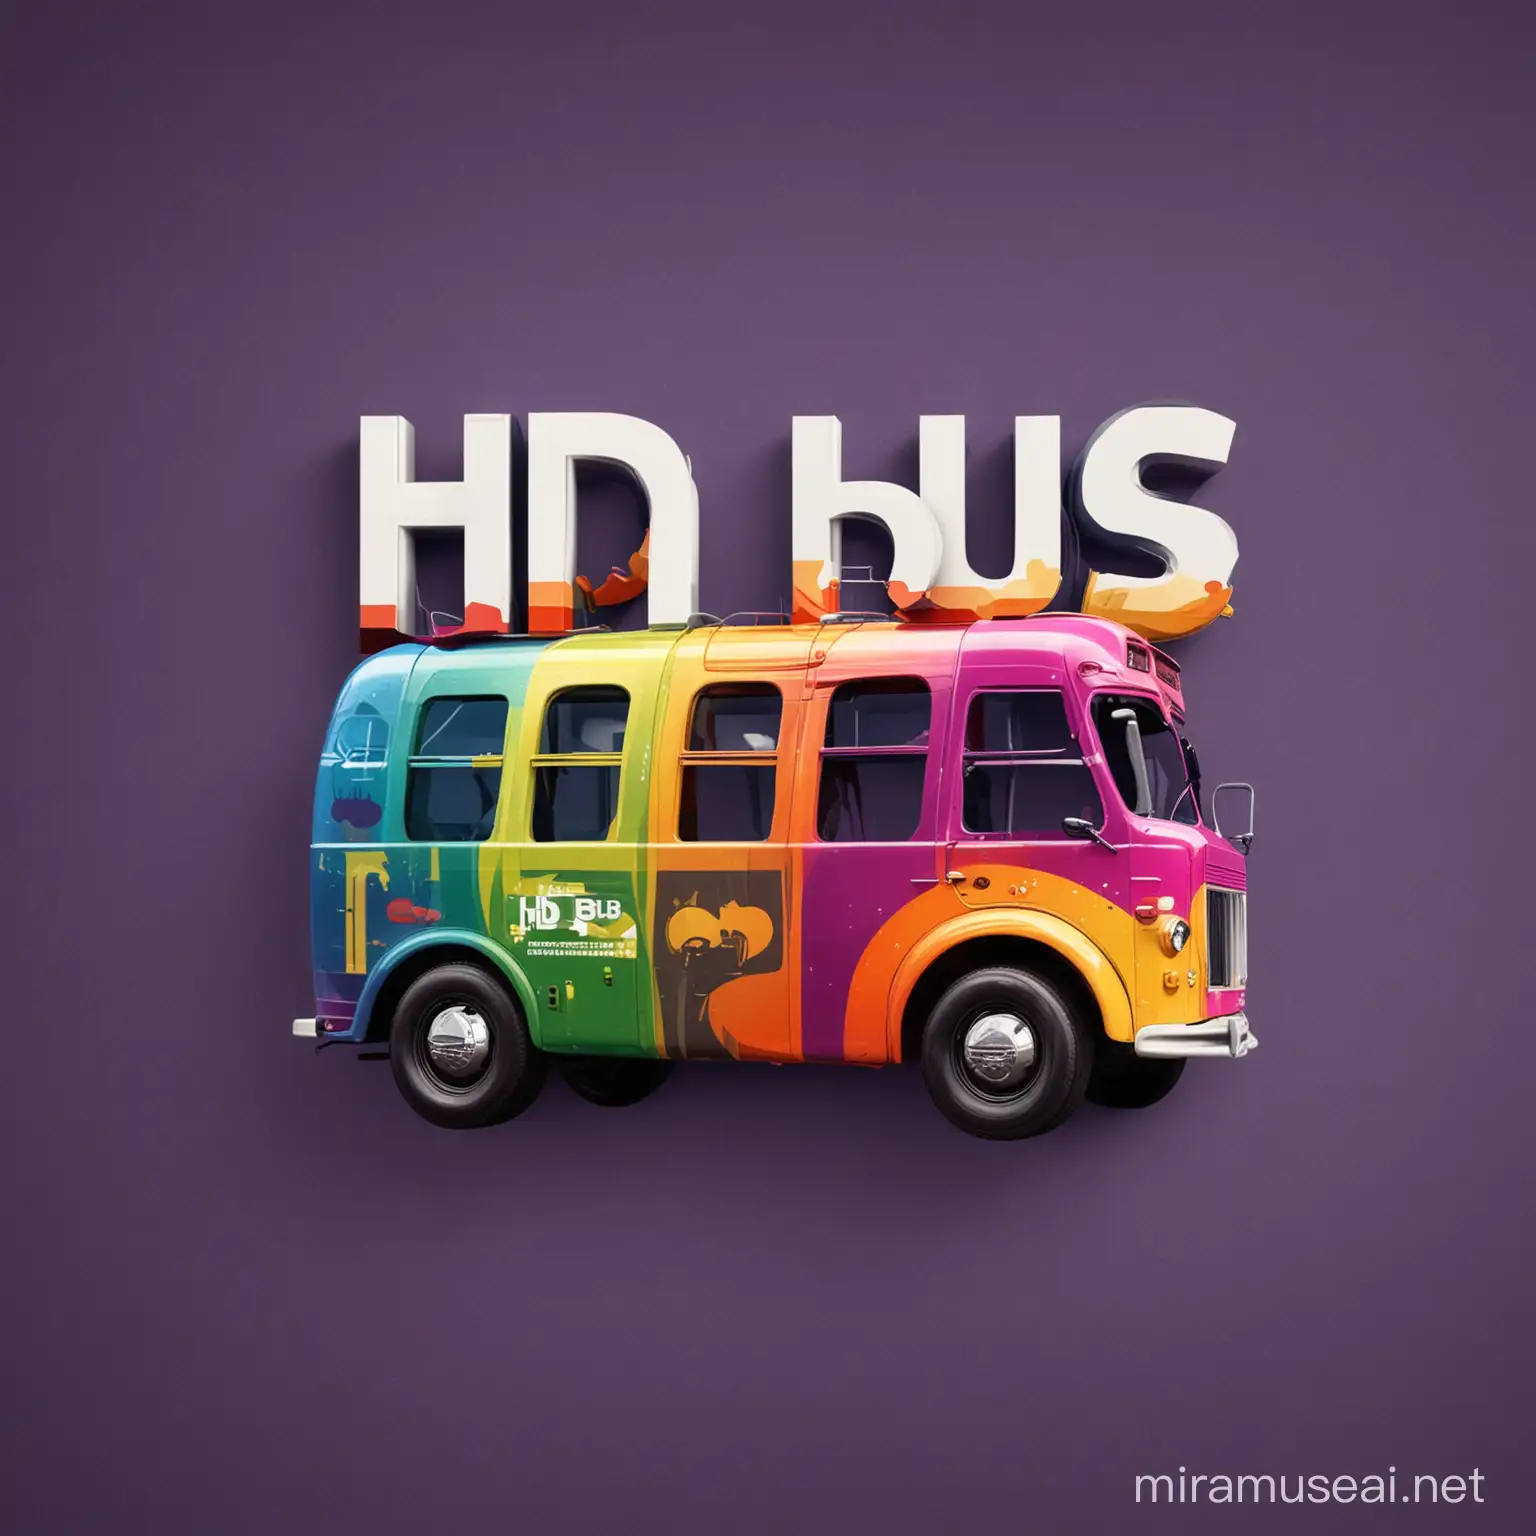 COLOURFUL, LOGO, WORDED "HD-BUS", 